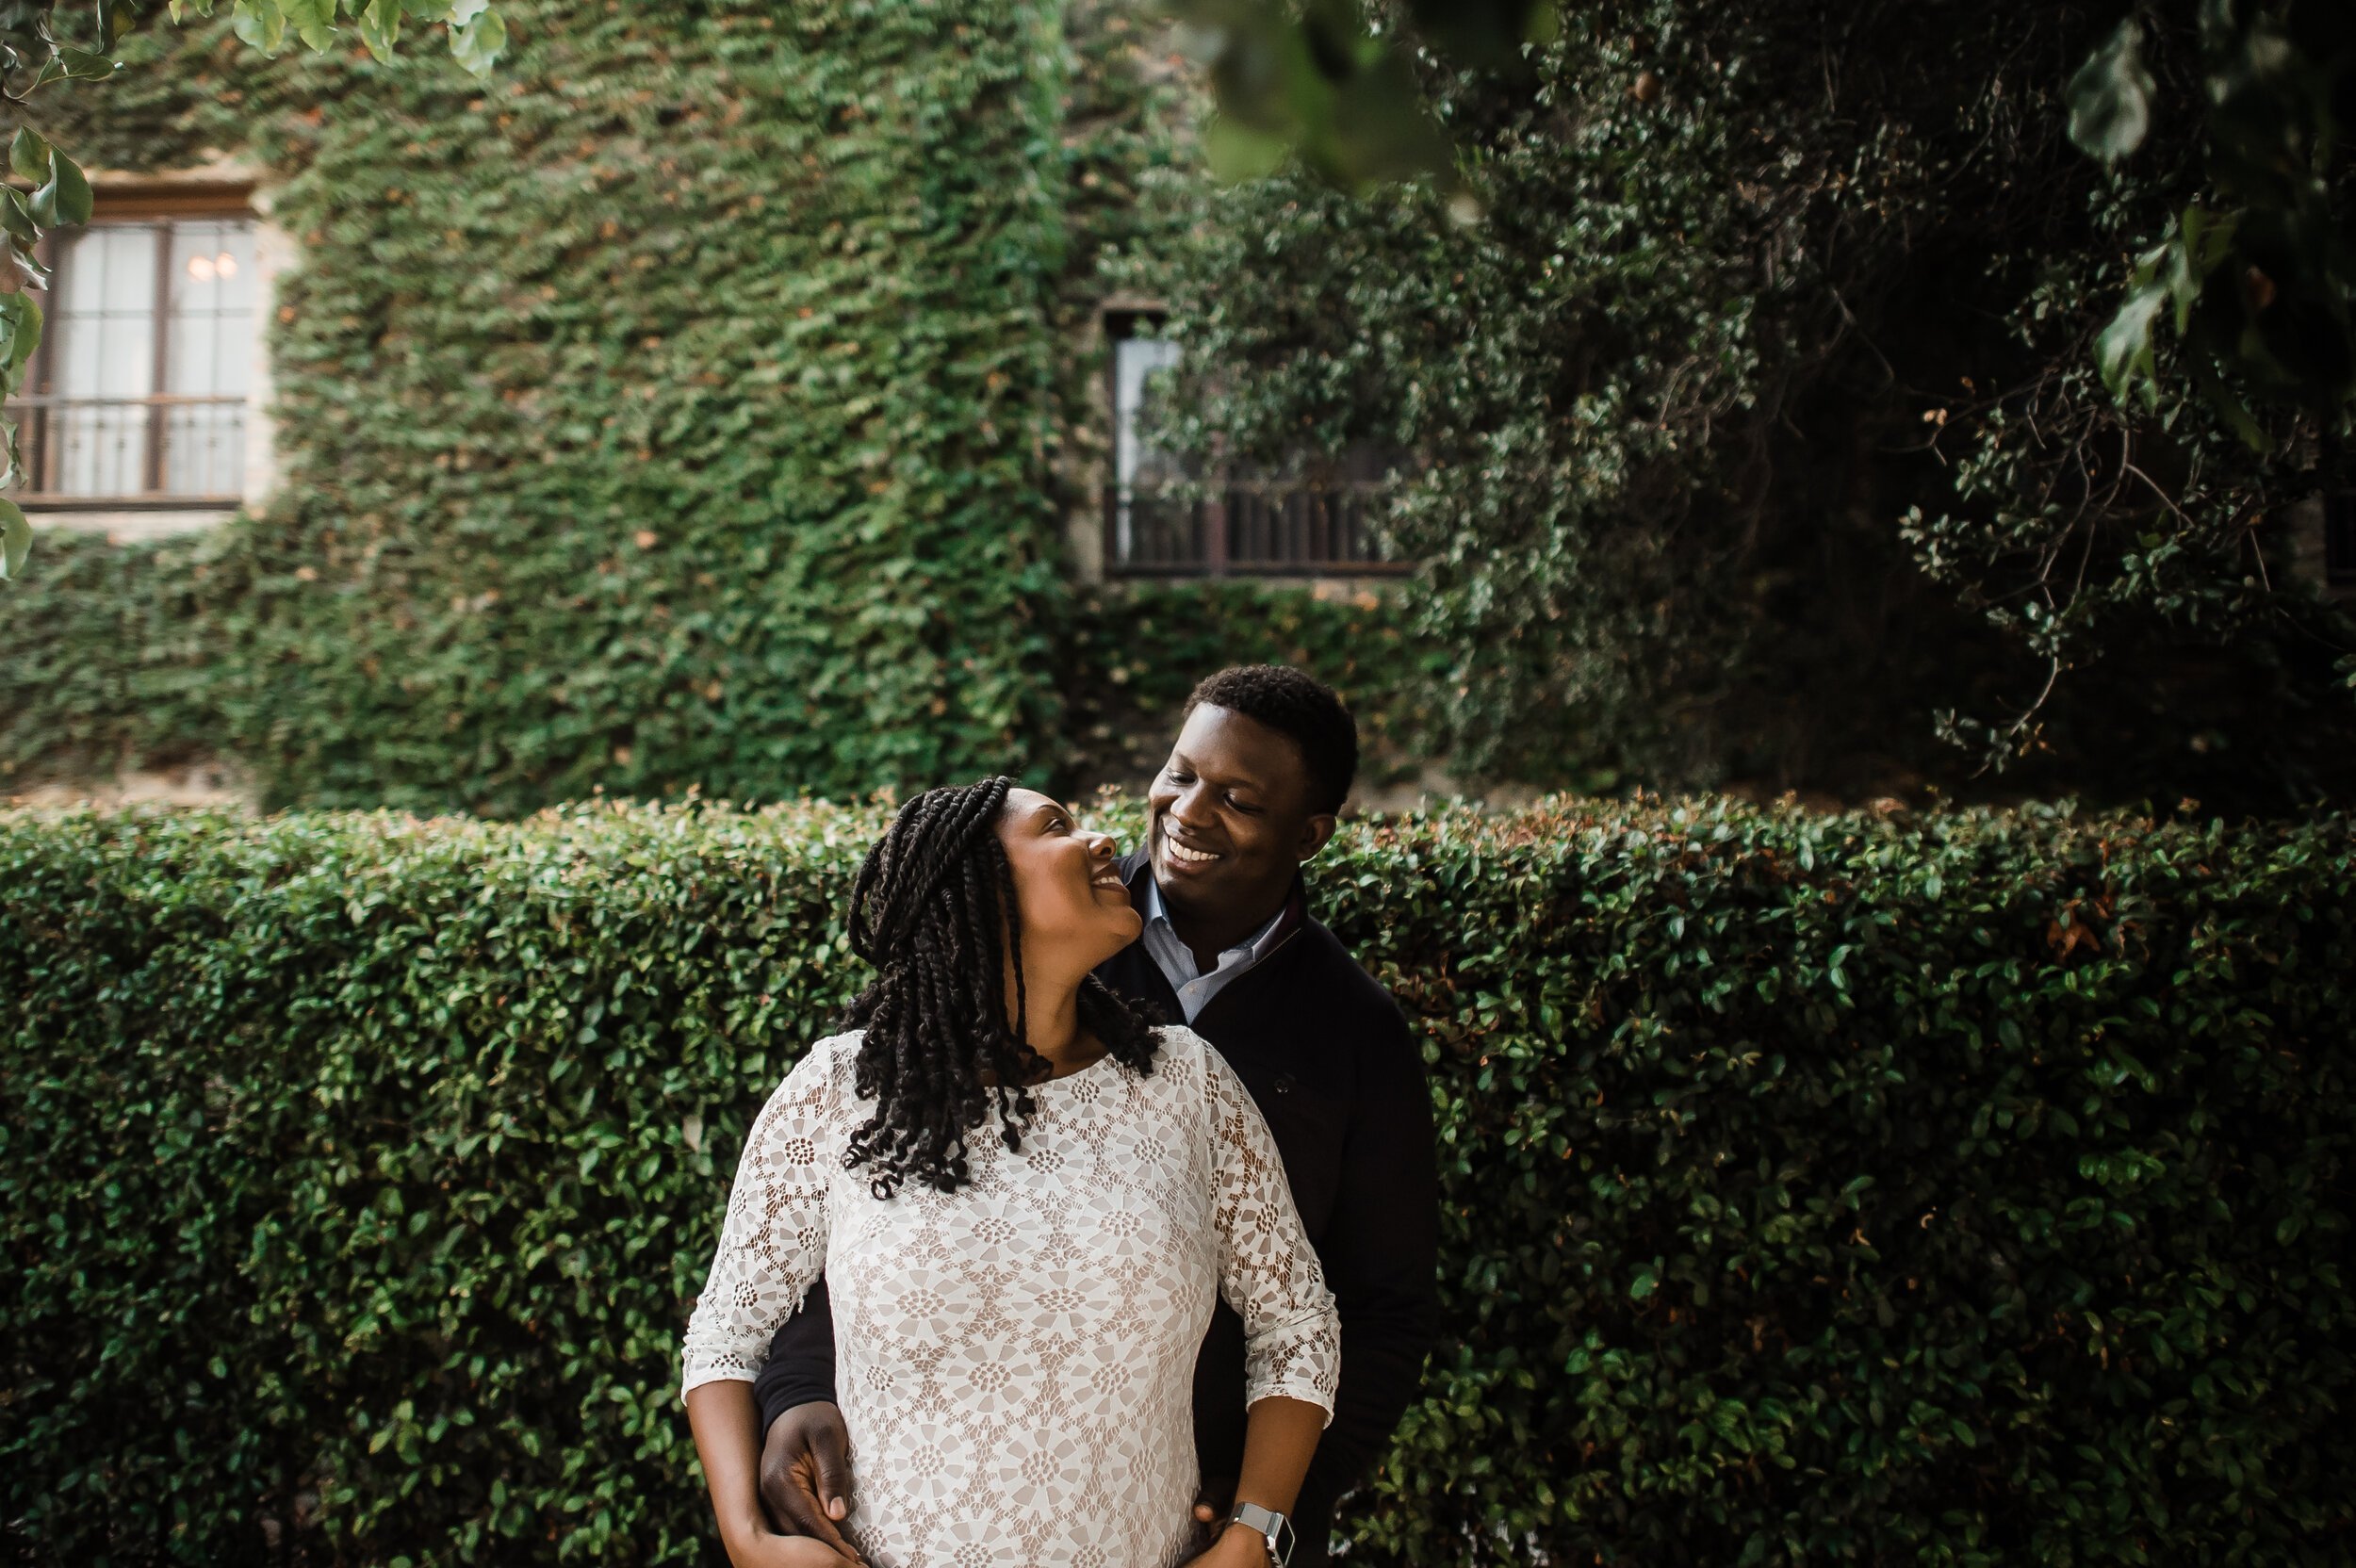 www.santabarbarawedding.com | Michelle Ramirez Photography | Couple Embraces in Front of Greenery During Engagement Shoot